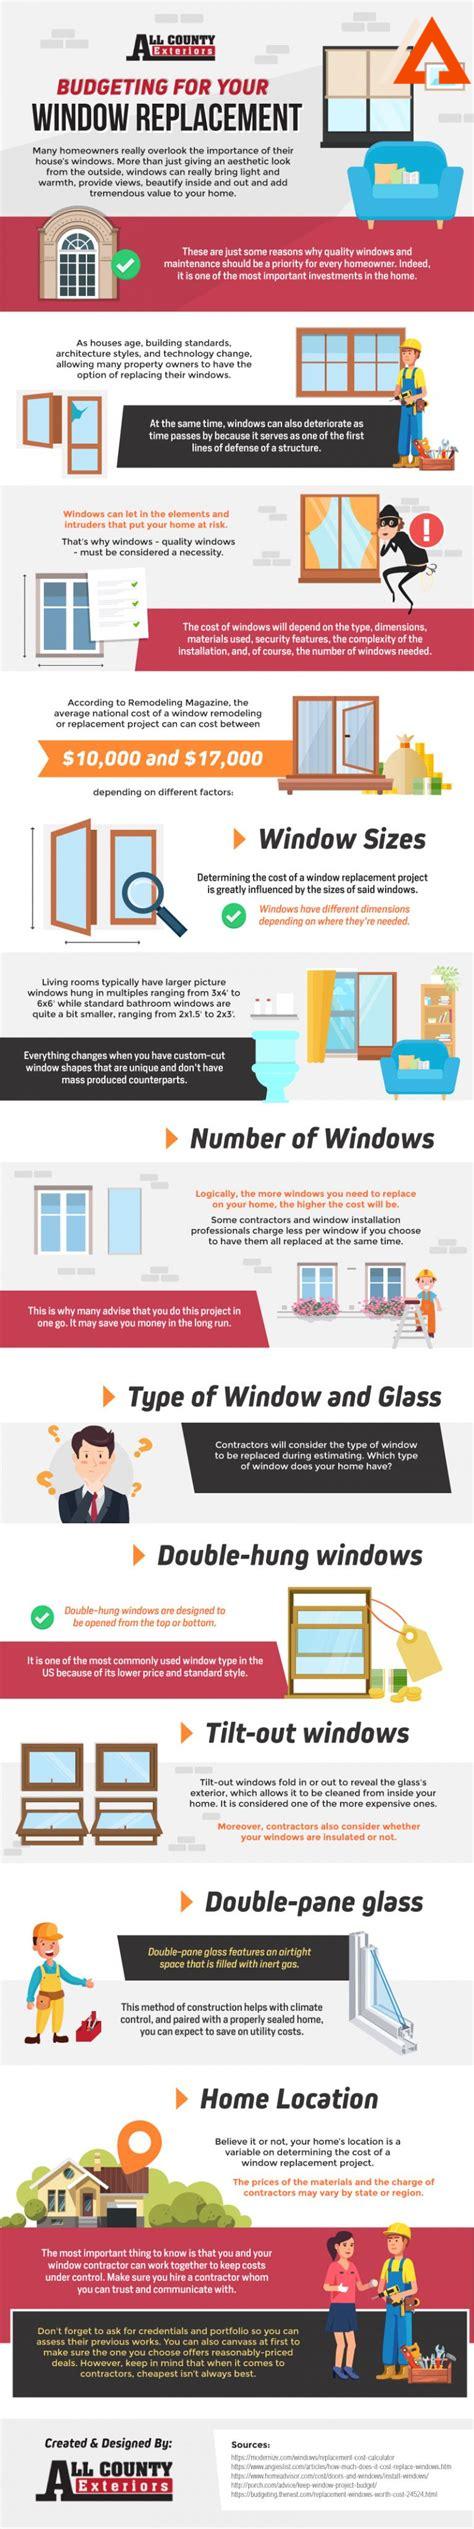 difference-between-replacement-and-new-construction-windows,Benefits of Replacement Windows,